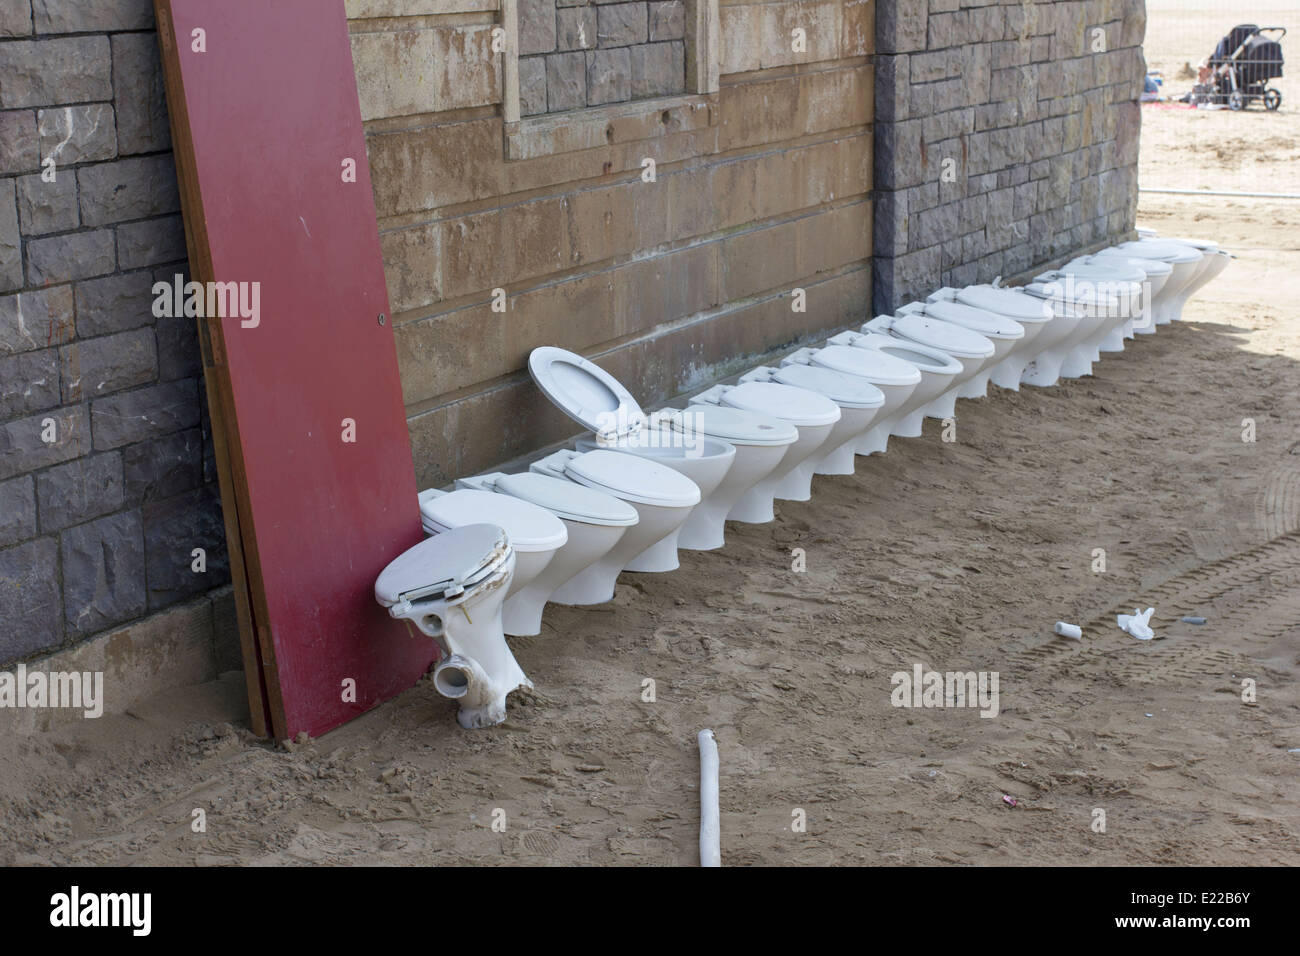 A row of toilets removed from a public toilet on the beach in Weston-super-Mare, England, UK Stock Photo